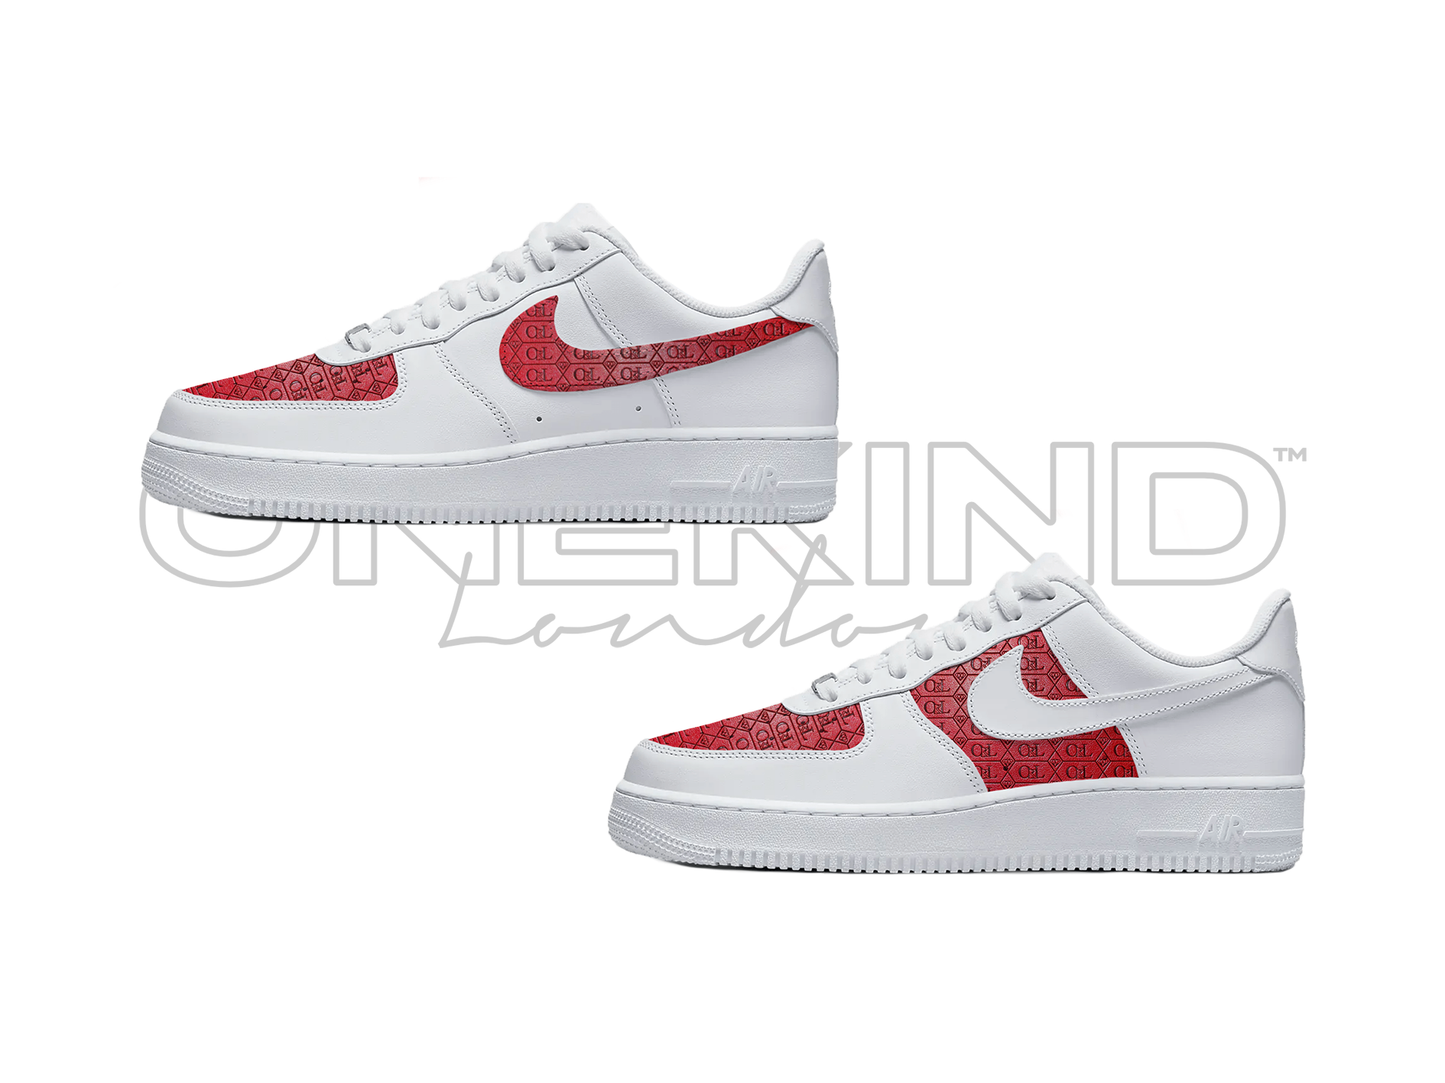 Nike AirForce 1 OKL Edition (Red & Blue)